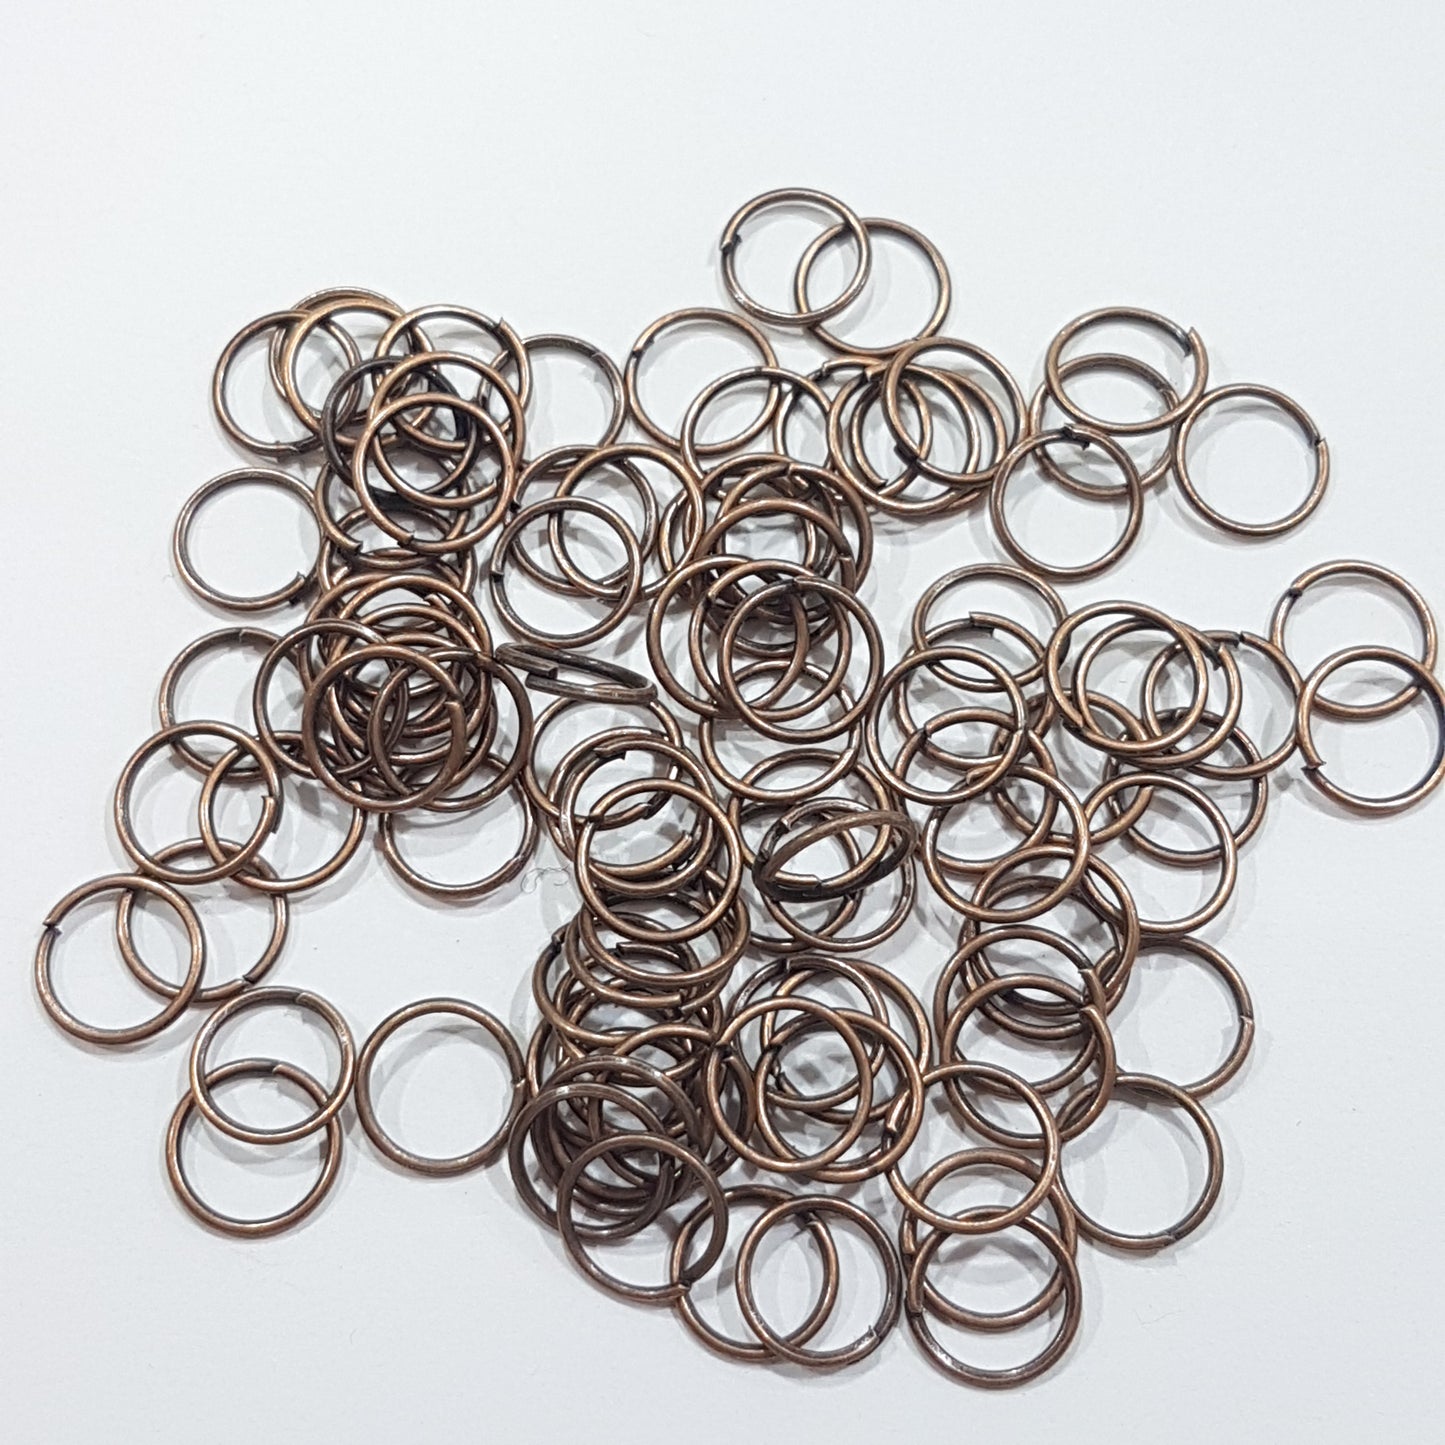 100pc 8mm Copper Jump Rings